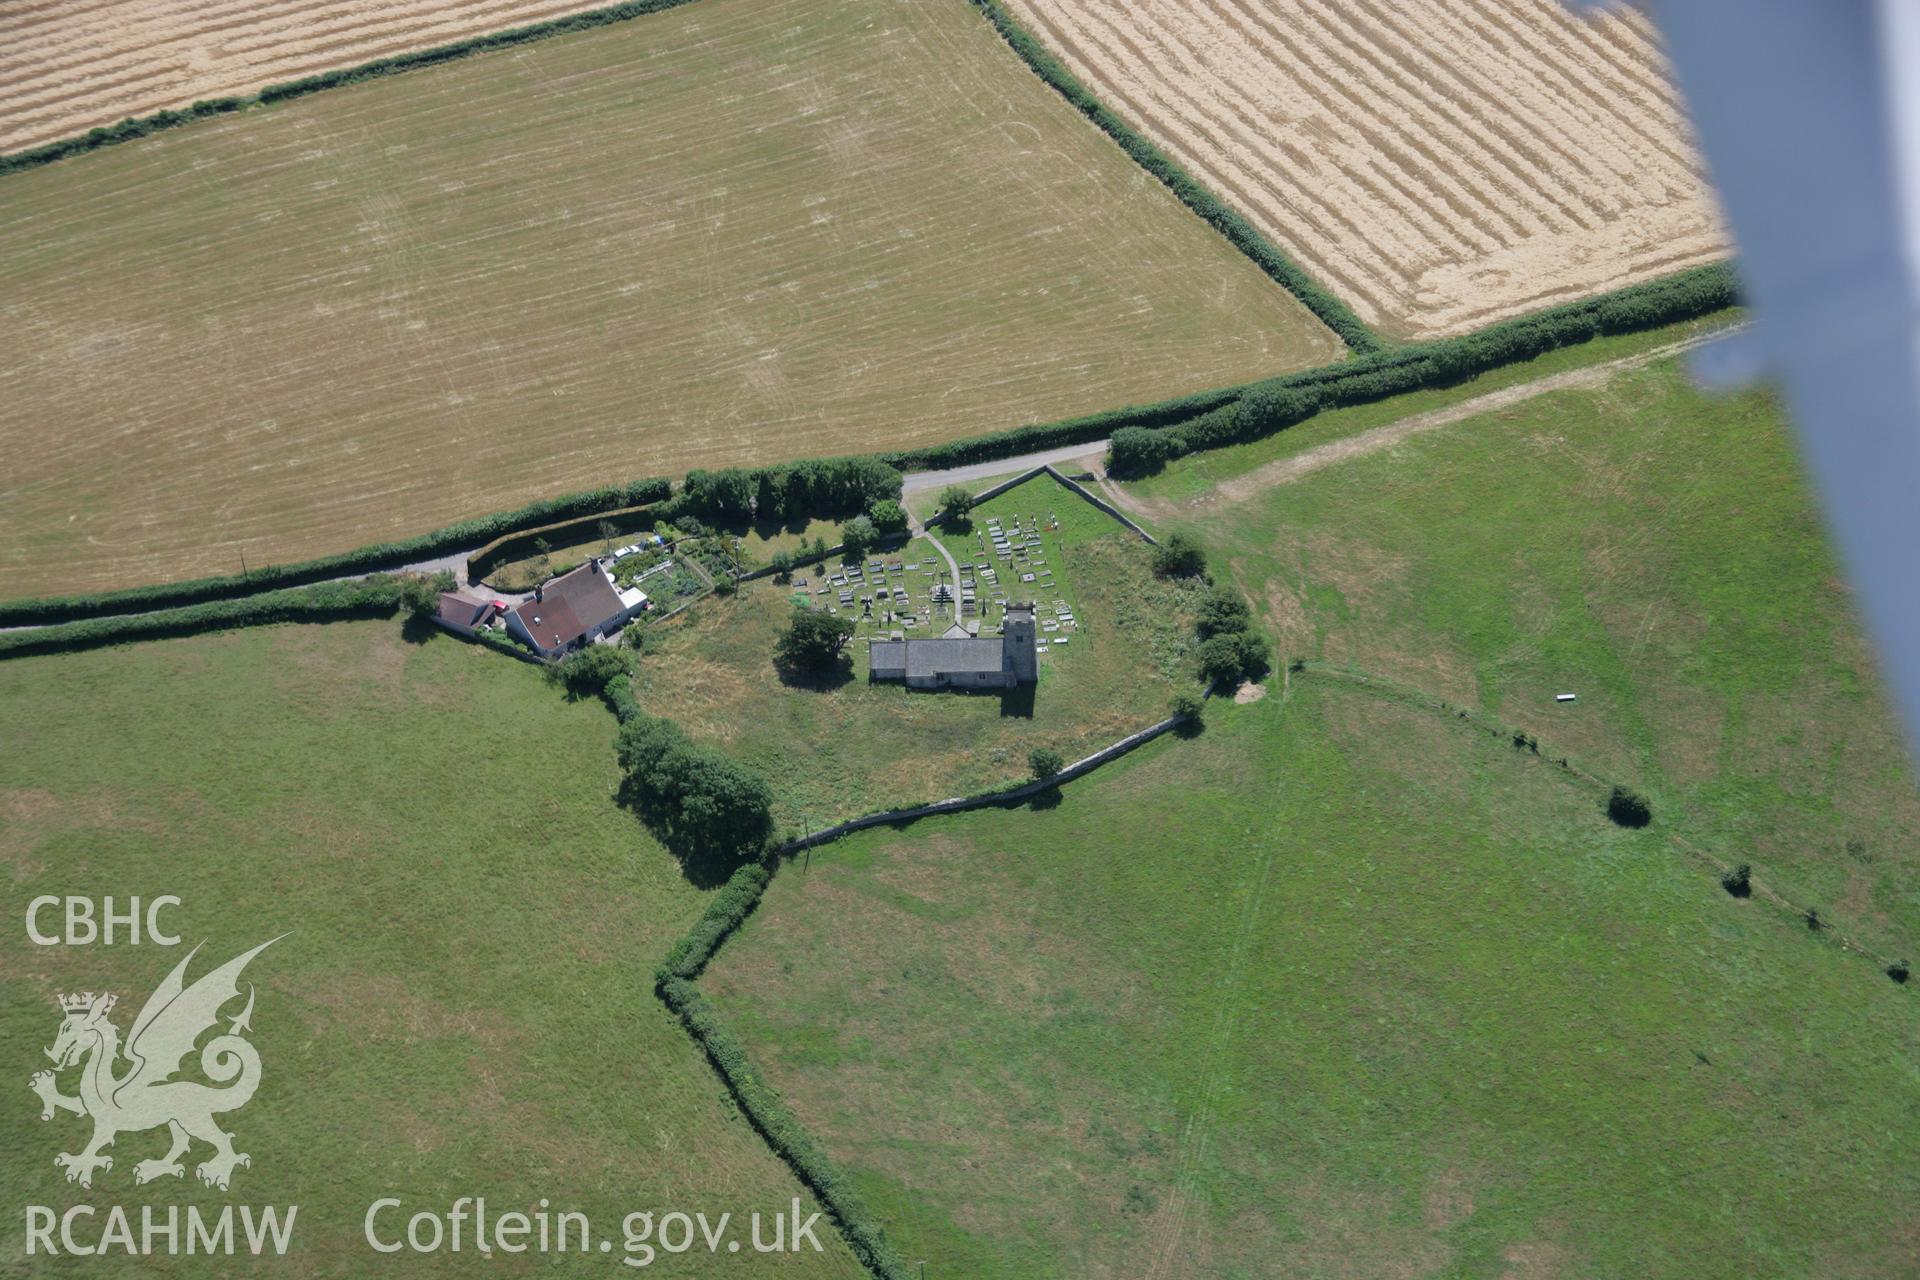 RCAHMW colour oblique aerial photograph of St Mary's Church, Penymynydd. Taken on 24 July 2006 by Toby Driver.